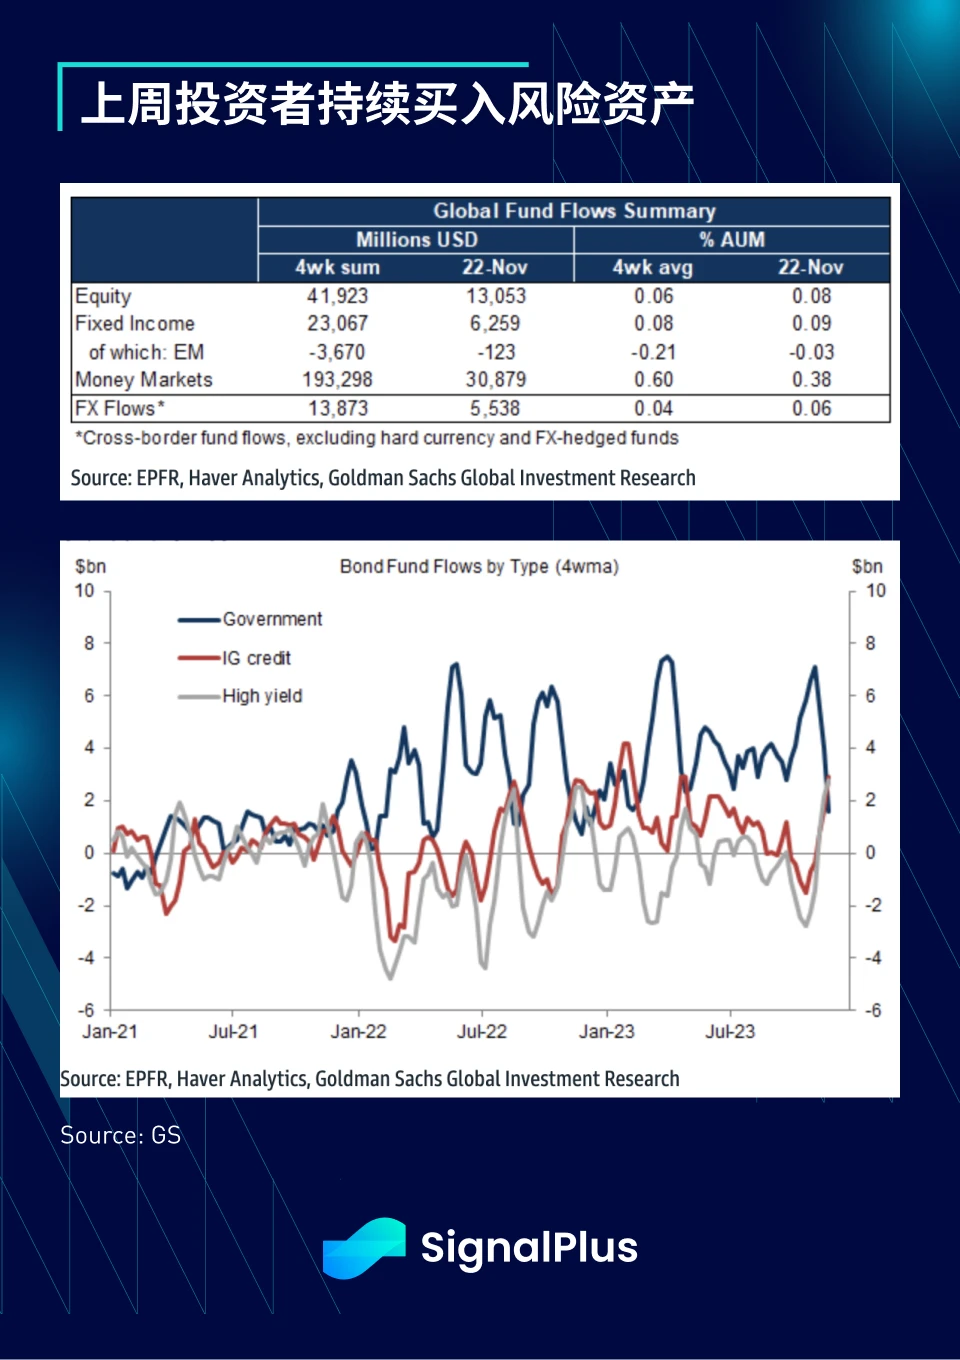 SignalPlus Macro Research Report (20231127): As the economy slows down, may the Federal Reserve cut interest rates ahead of schedule?